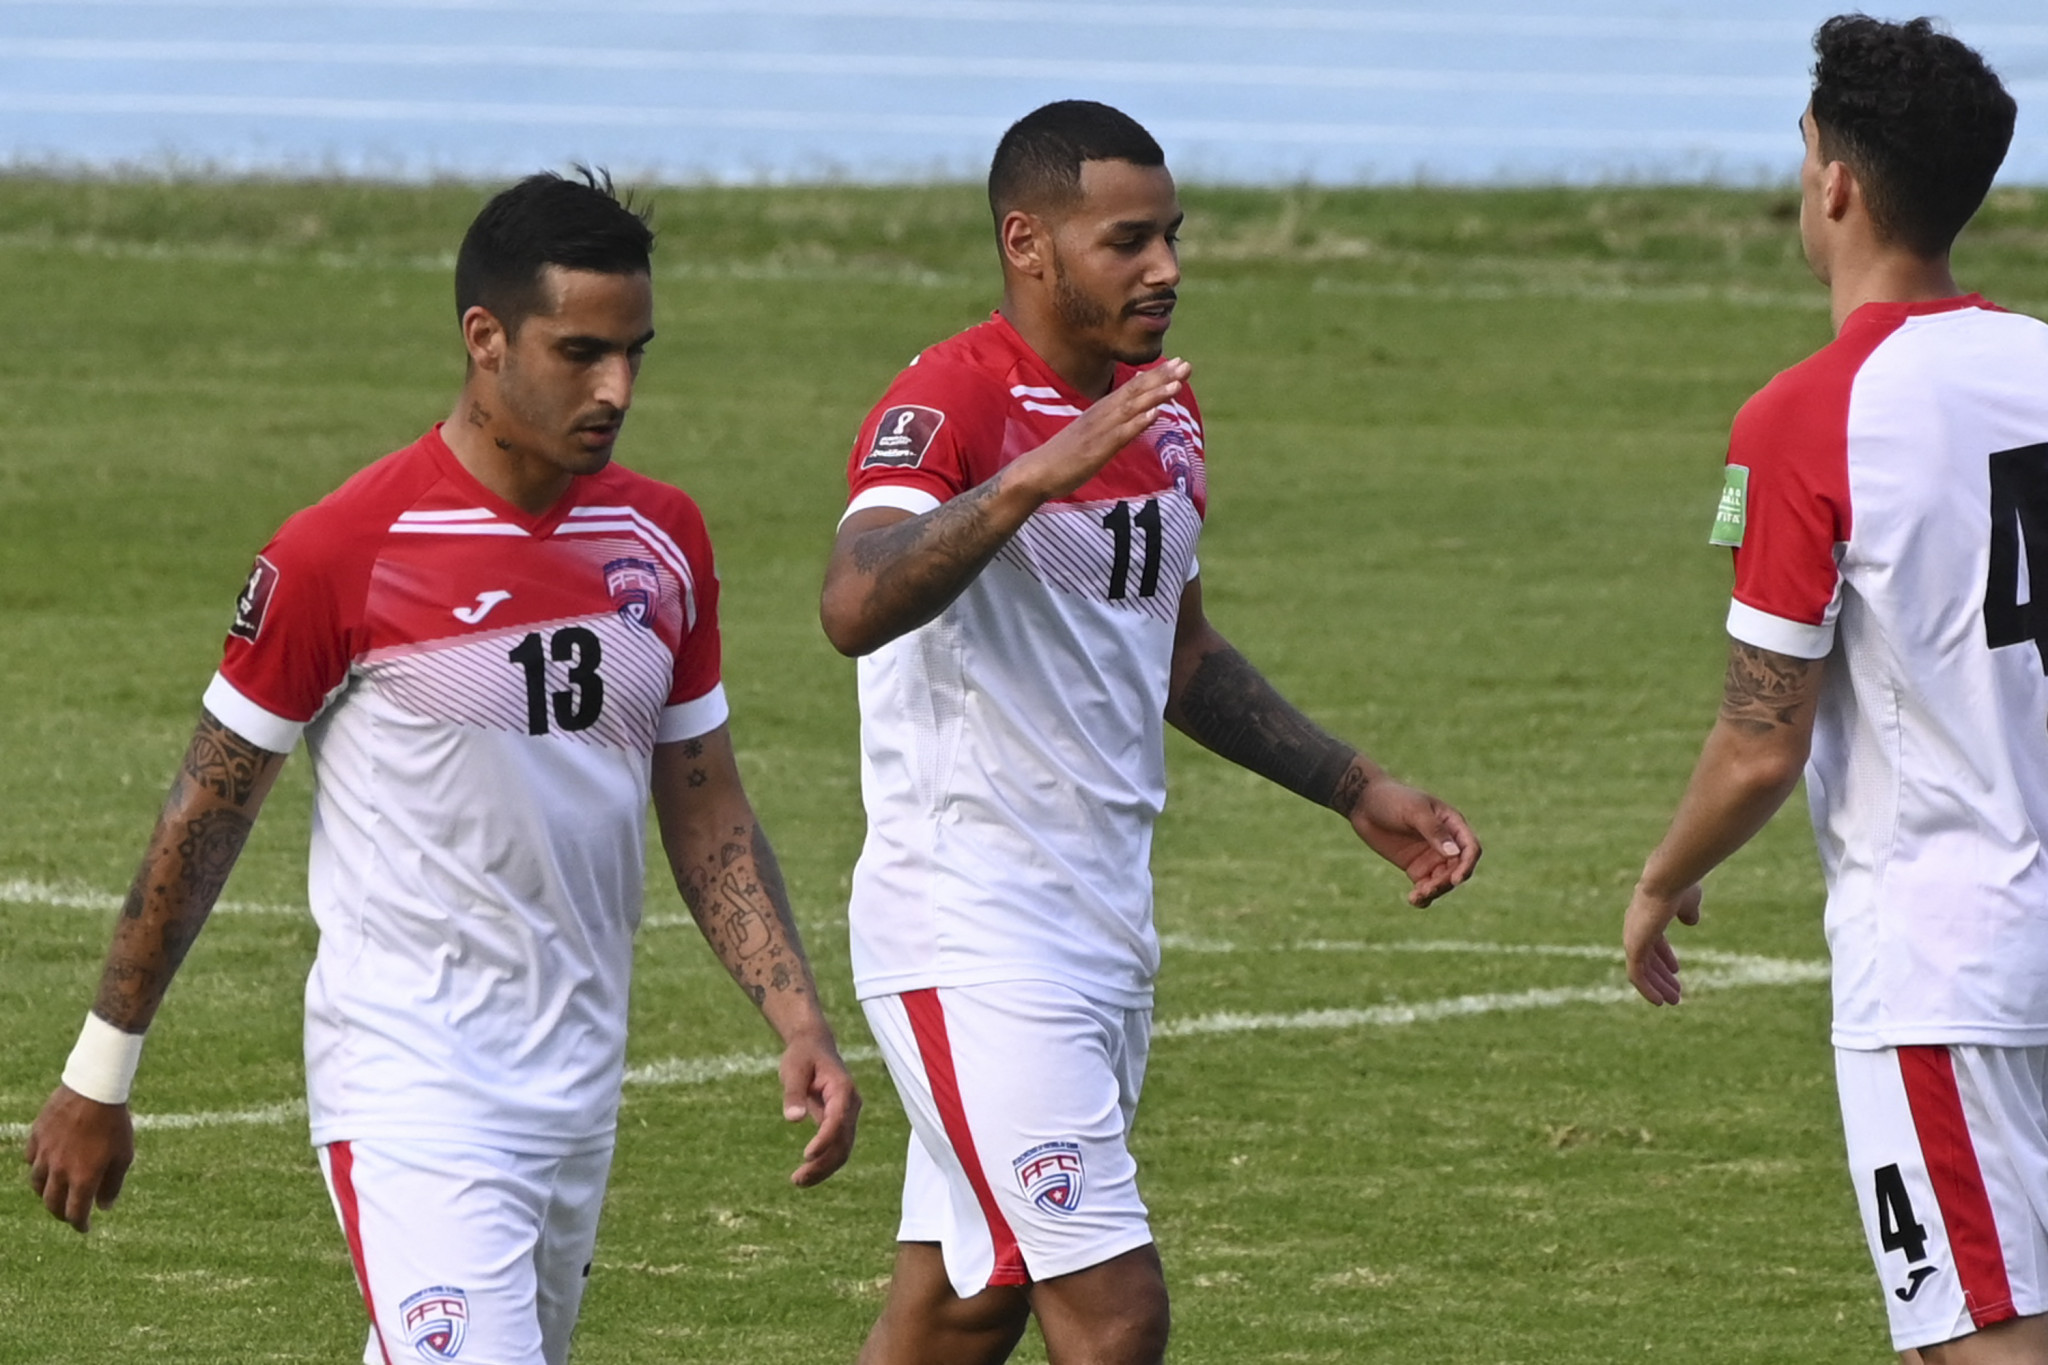 Cuba forced to withdraw from Gold Cup qualifiers due to COVID-19 restrictions